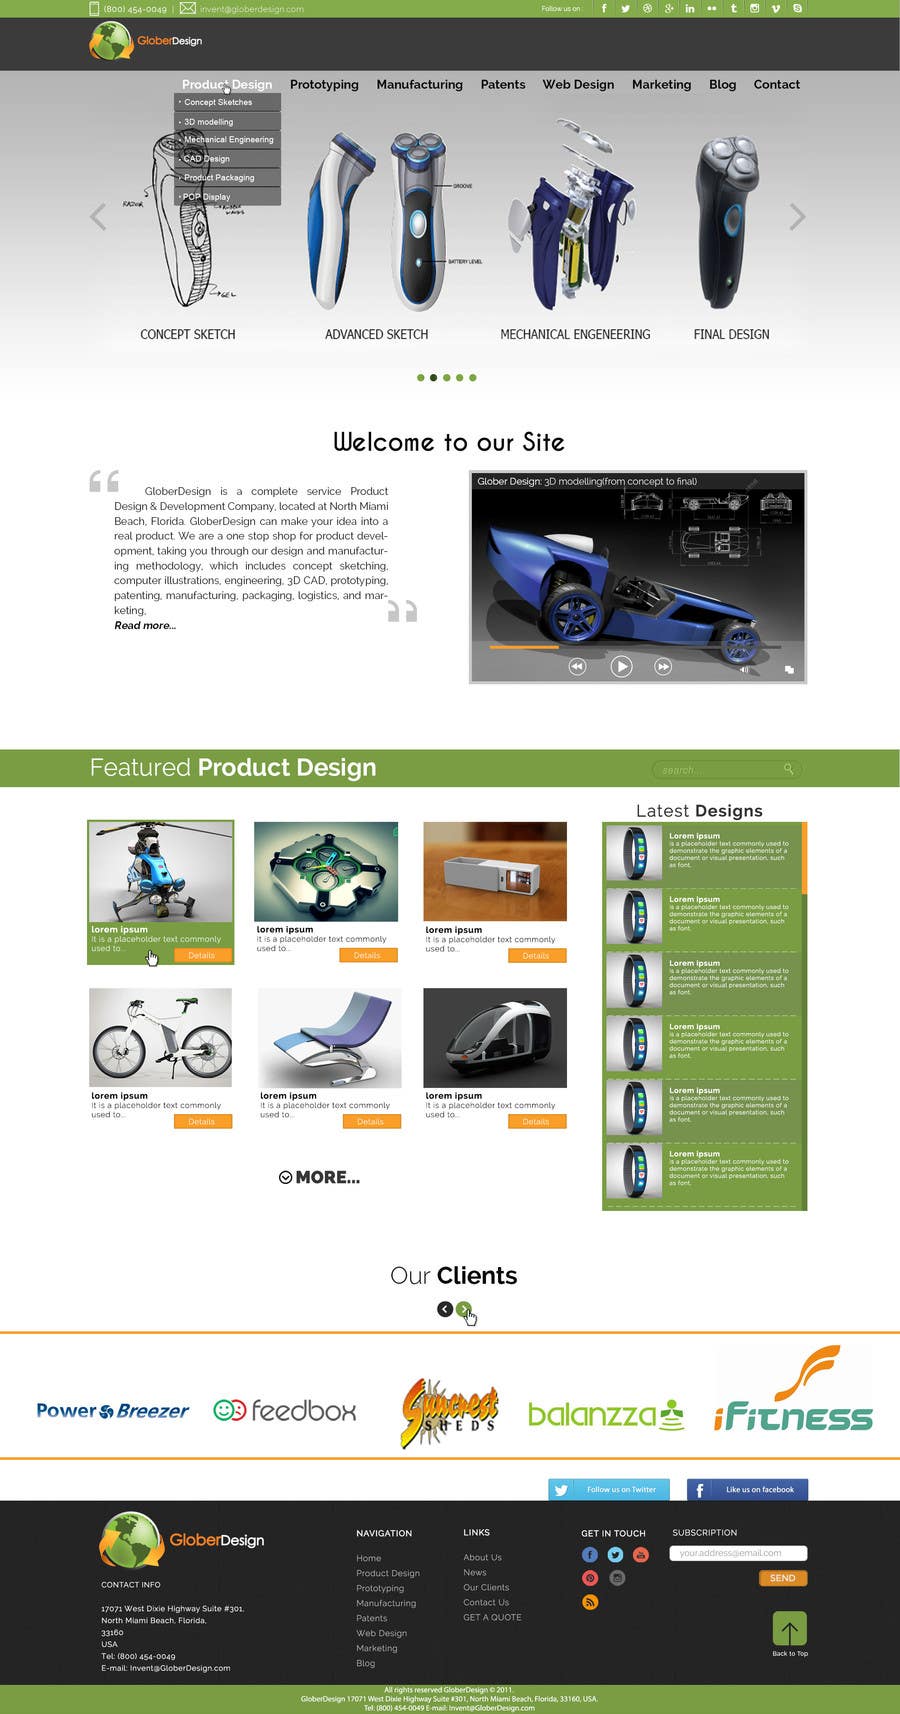 Bài tham dự cuộc thi #14 cho                                                 Design a Website Mockup for our new product design website
                                            